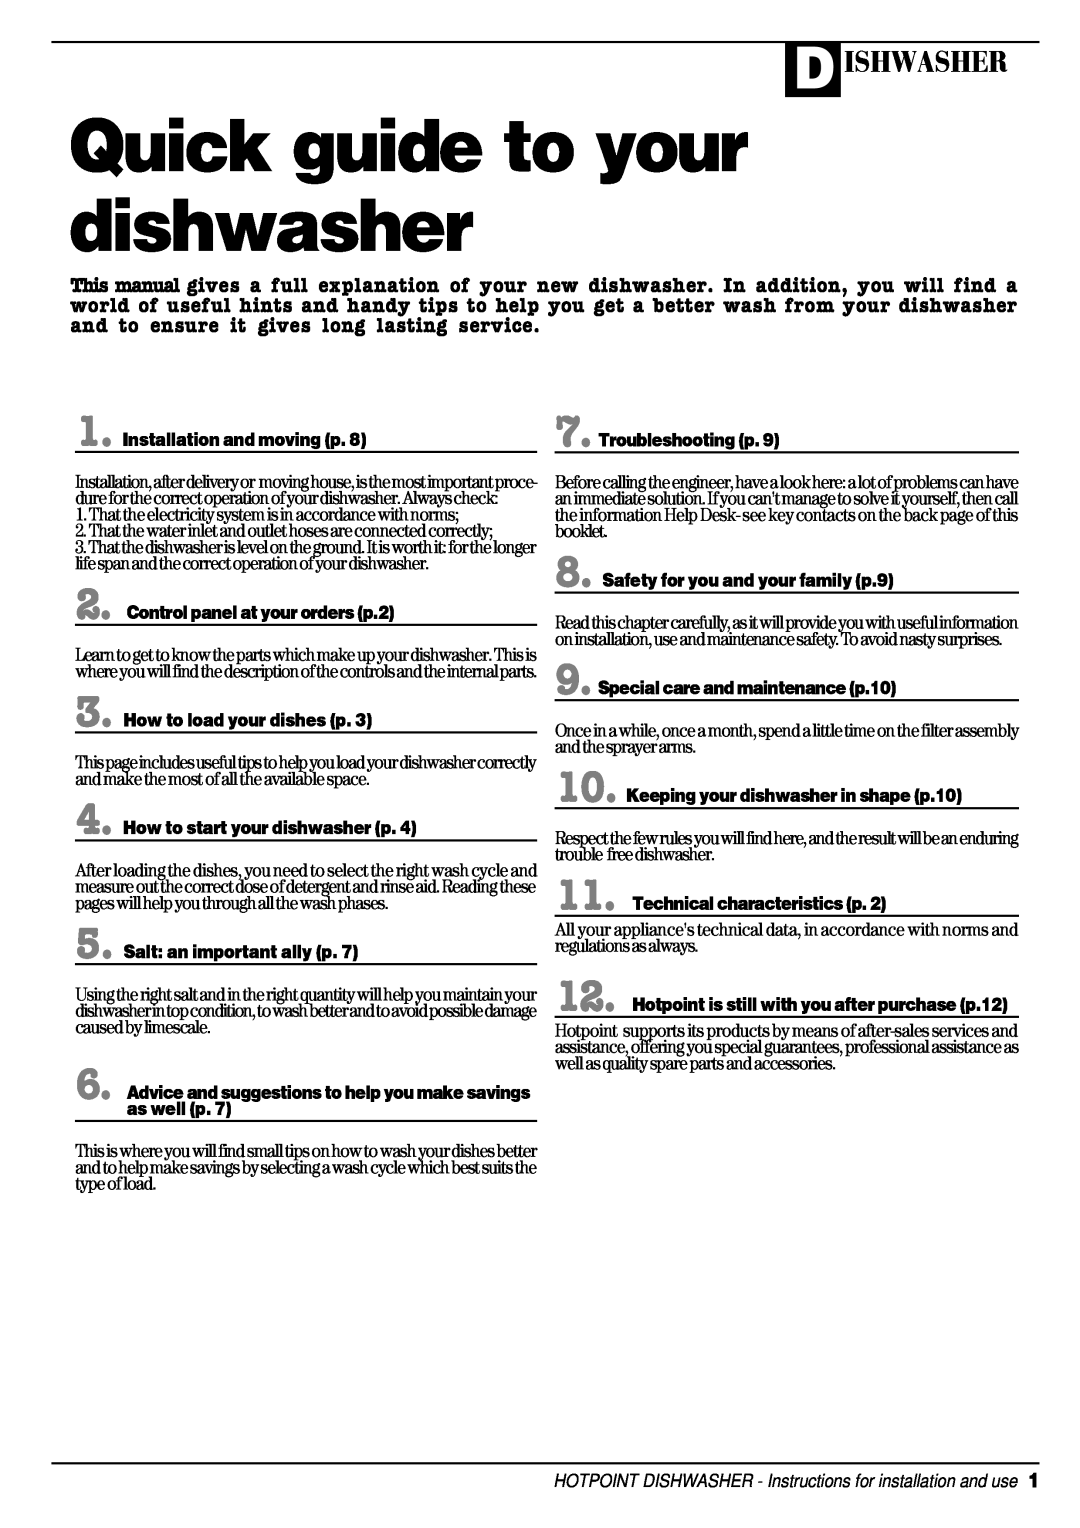 Hotpoint DC 28 manual D Ishwasher, Quick guide to your dishwasher, Installation and moving p, Troubleshooting p 